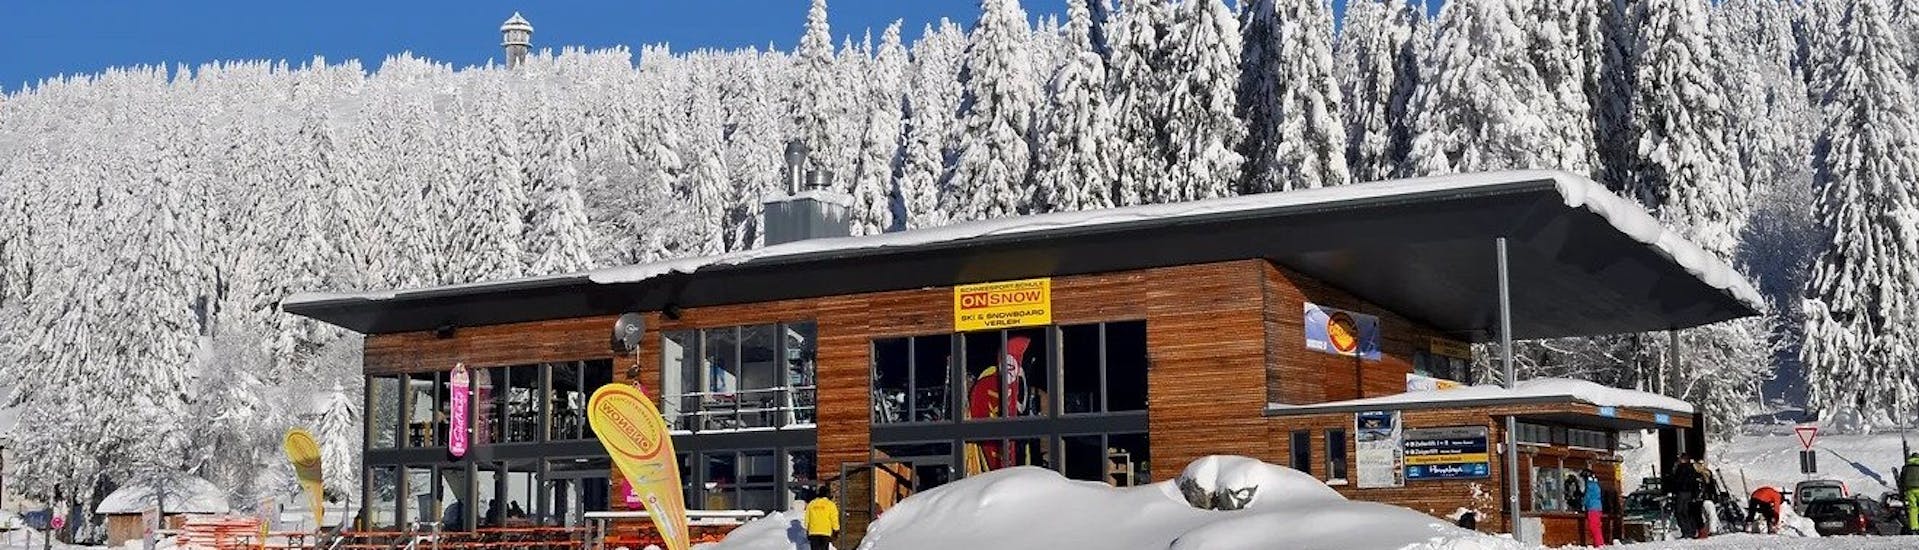 A photo of the ON SNOW Snow Sports School Feldberg during Private Ski Lessons for Adults of All Levels in winter on a sunny day.